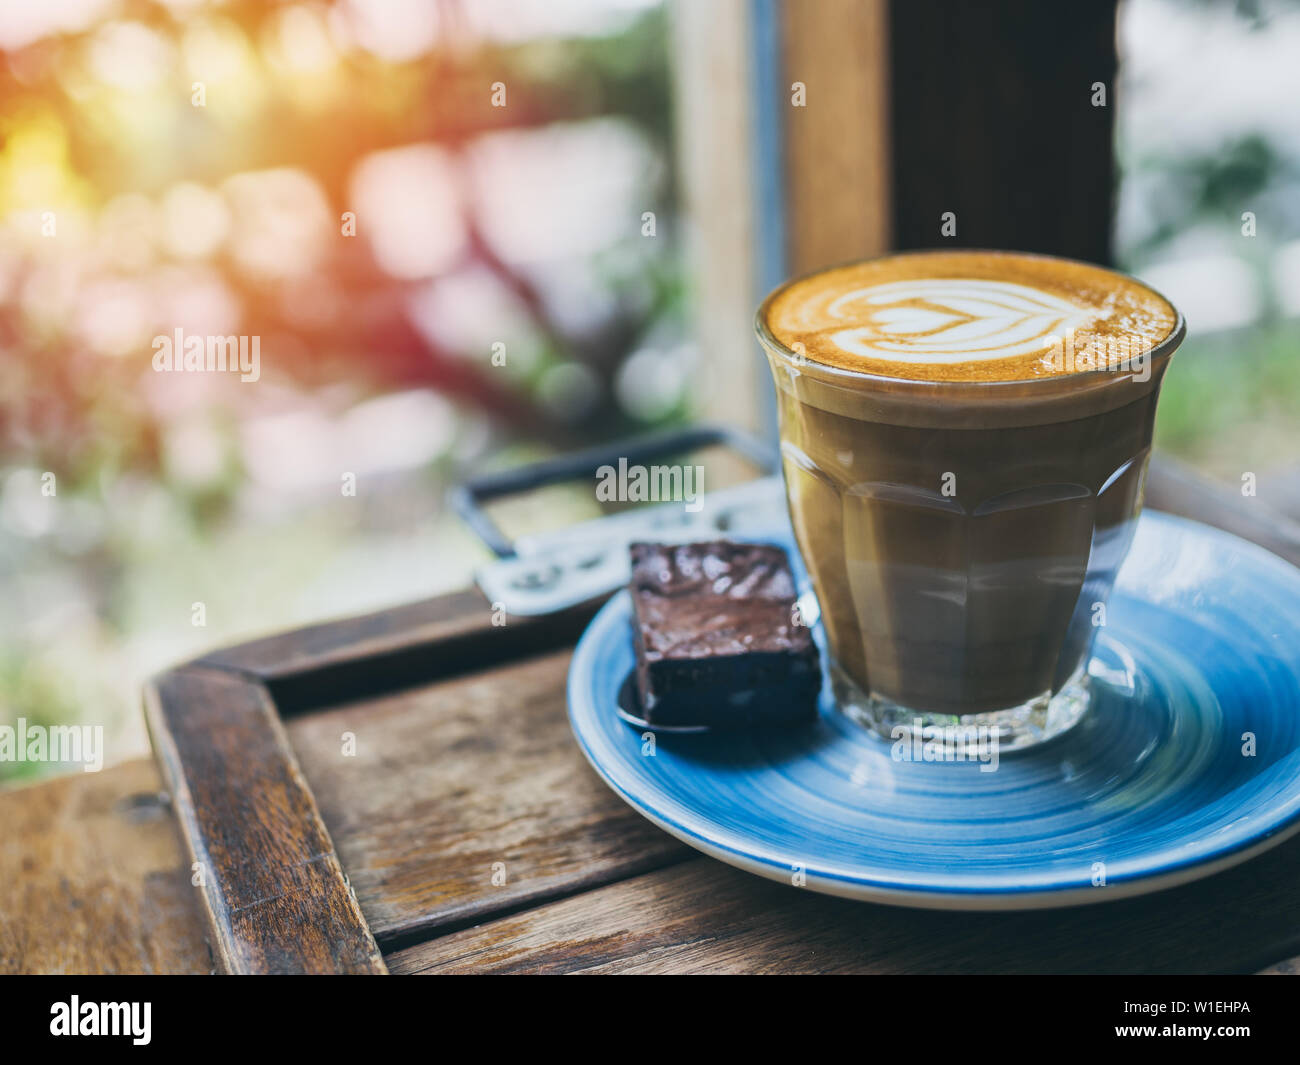 https://c8.alamy.com/comp/W1EHPA/piccolo-latte-coffee-topping-with-flower-art-from-milk-in-small-glass-with-a-piece-of-homemade-brownies-cake-on-blue-ceramic-plate-on-wooden-tray-on-w-W1EHPA.jpg